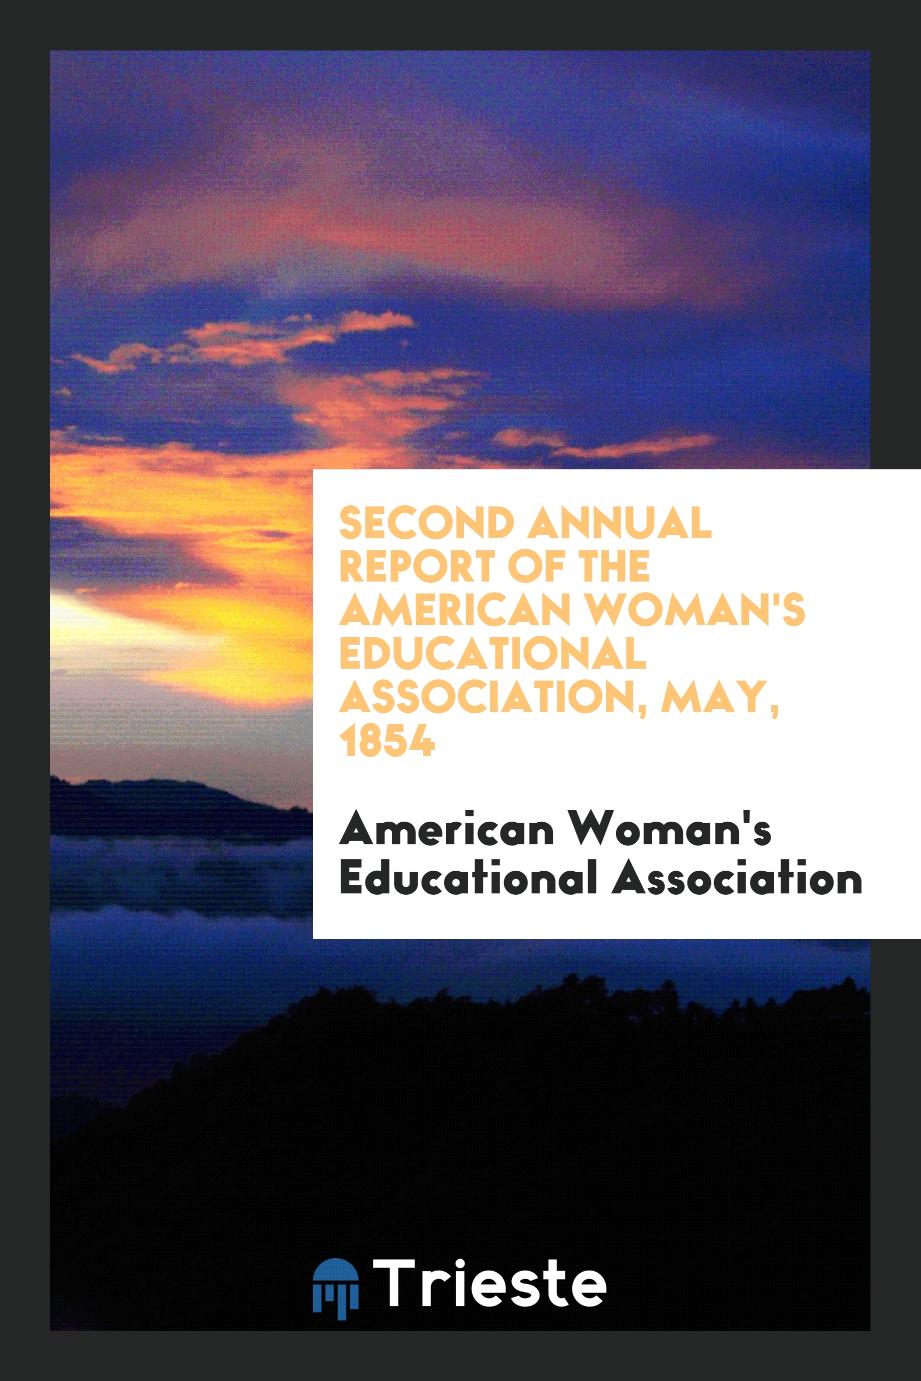 Second Annual Report of the American Woman's Educational Association, May, 1854